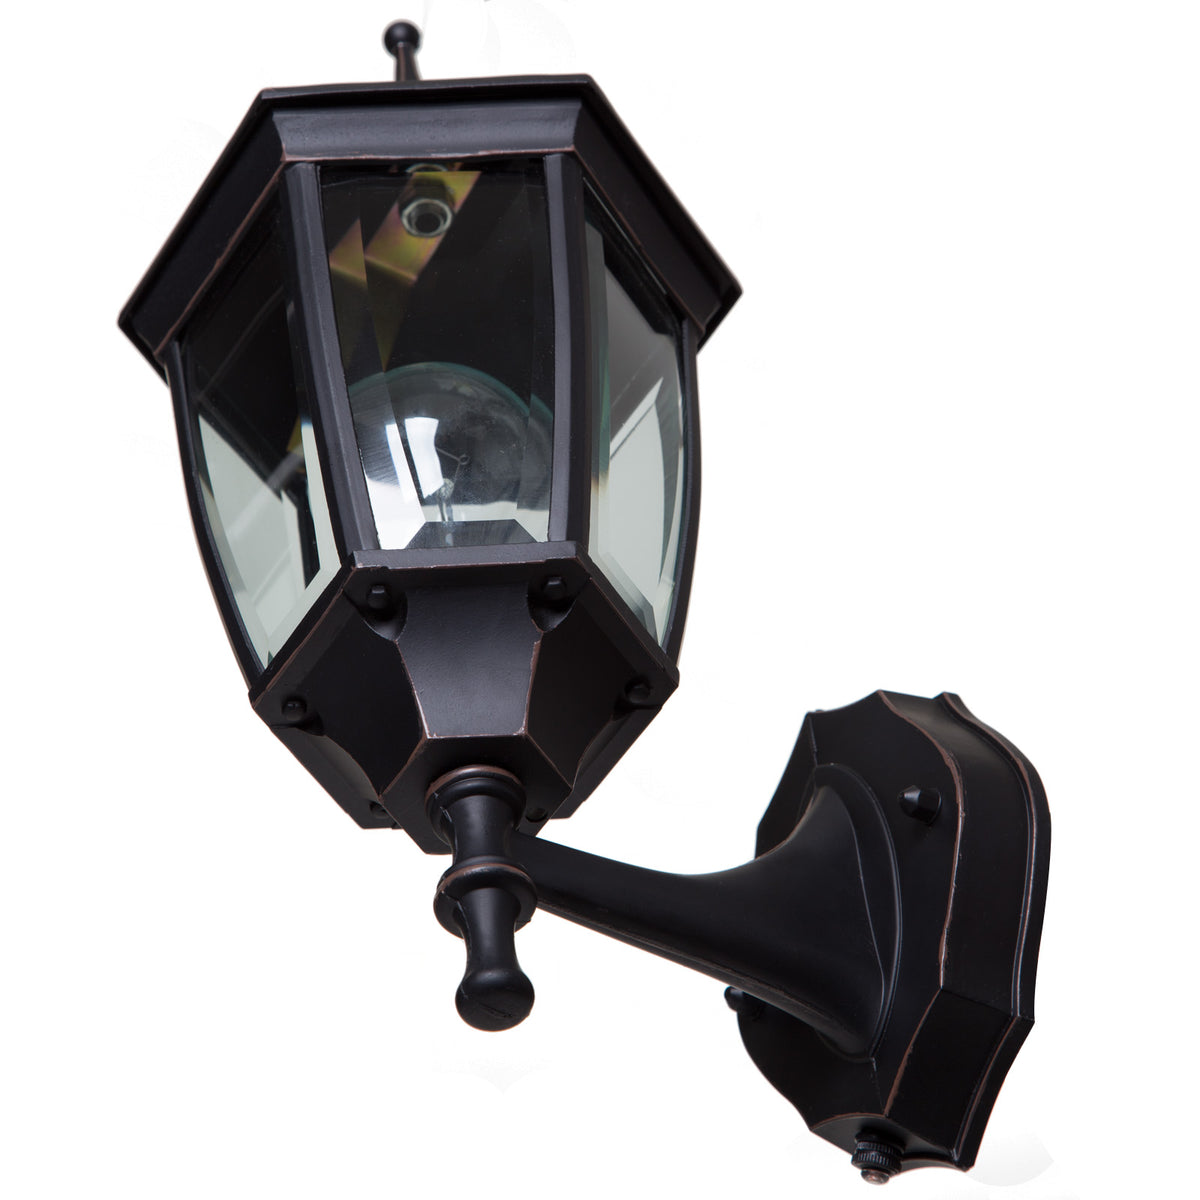 buy outdoor lanterns at cheap rate in bulk. wholesale & retail outdoor decoration supply store.